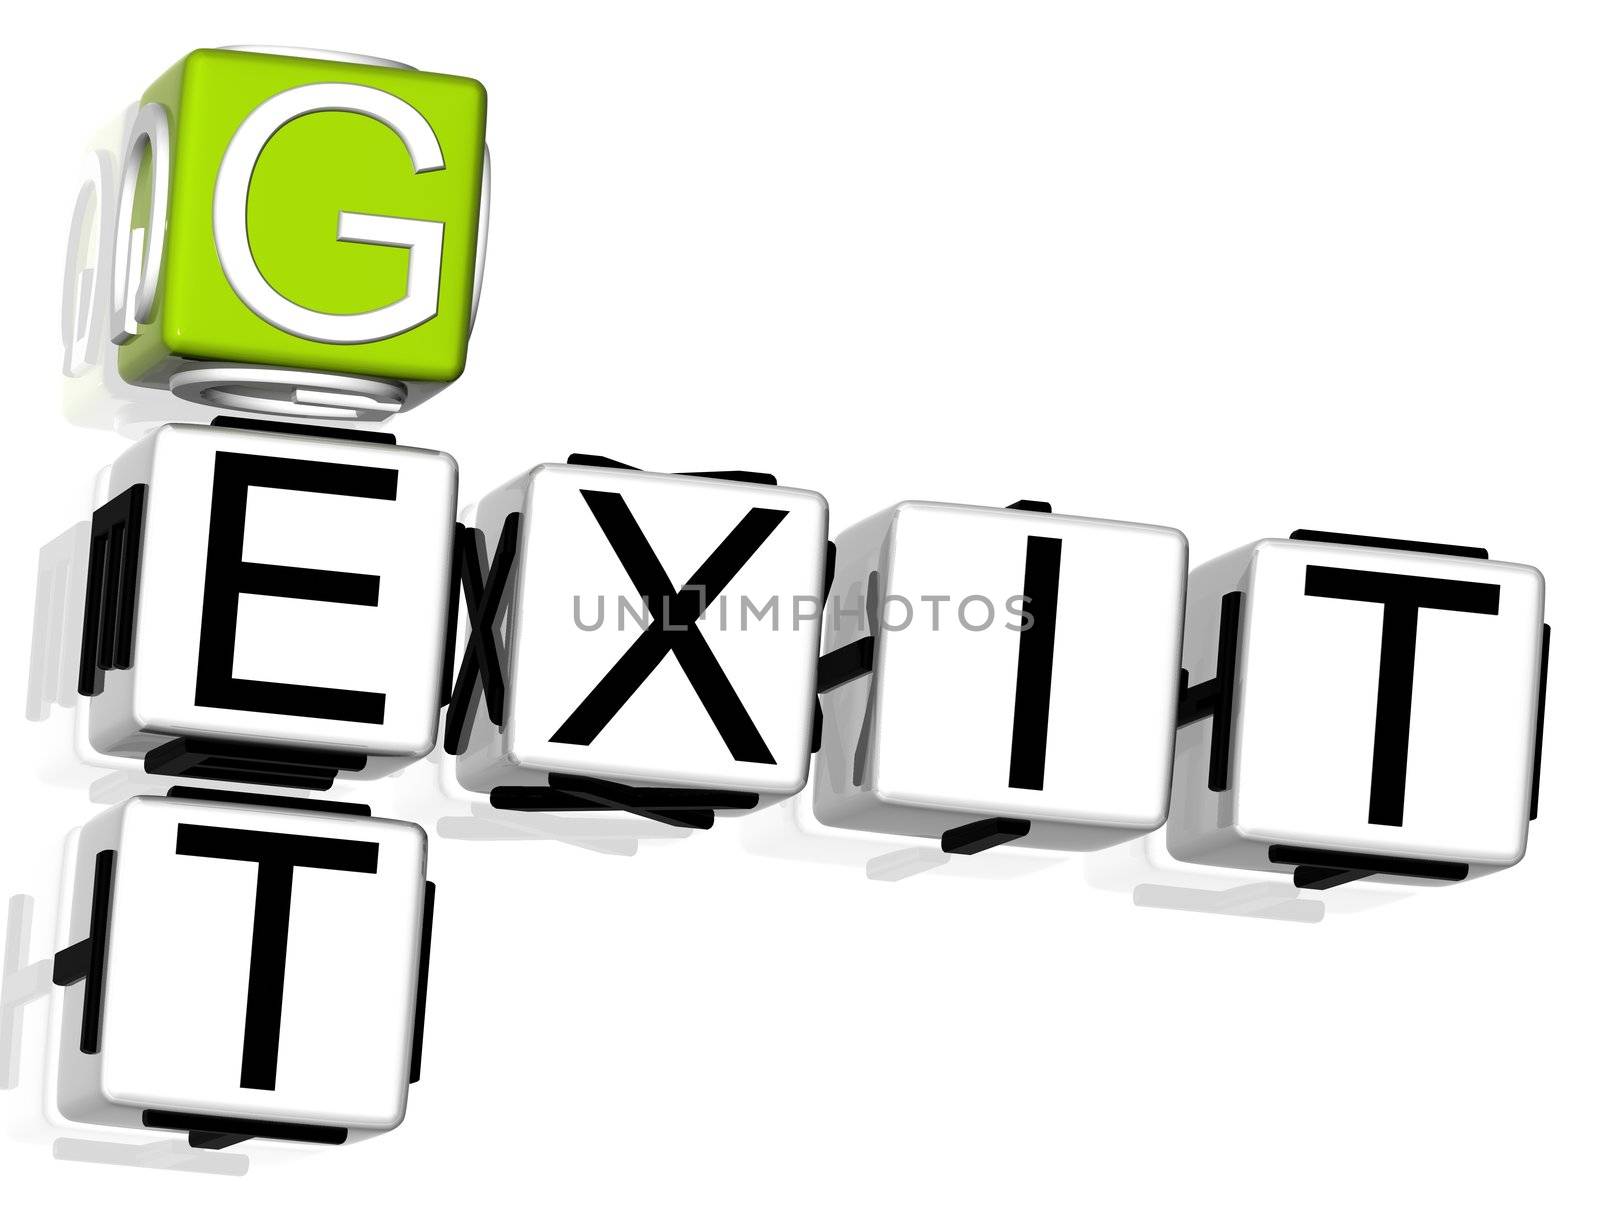 3D Get Exit Crossword on white background